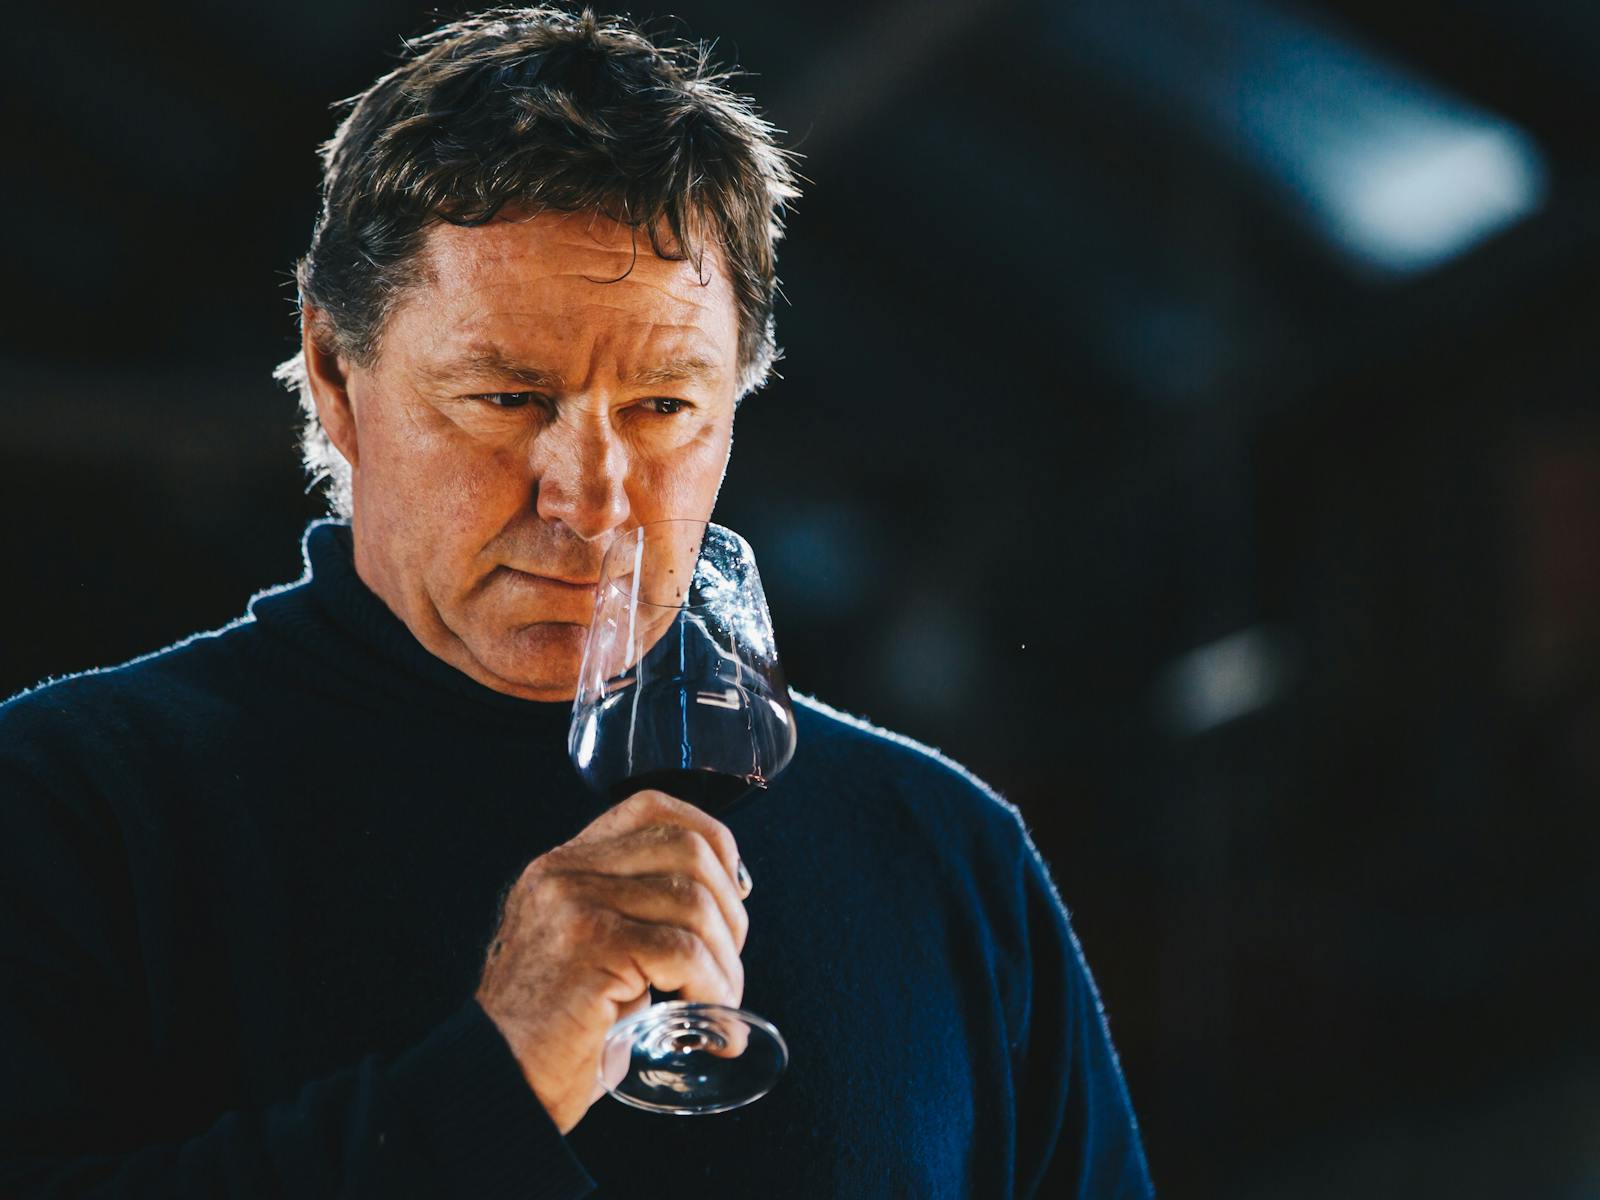 Meet Howard the vigneron.  His commitment to meticulous vine care results in exceptional wine.